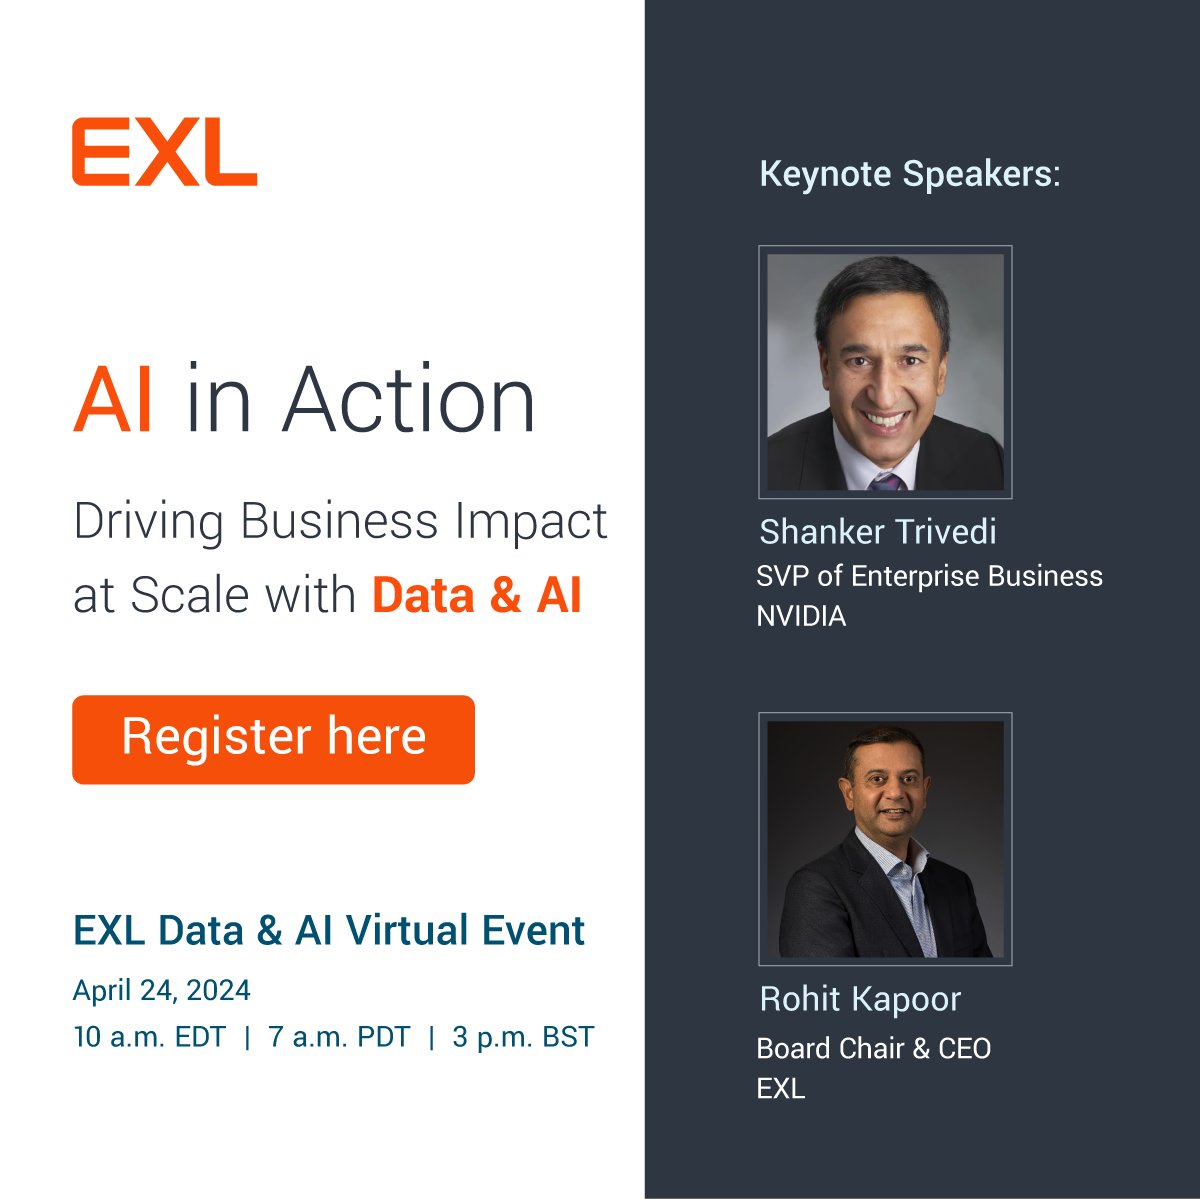 Join speakers @shankert, SVP of Enterprise Business at NVIDIA & @RohitKapoorEXL, Board Chair & CEO of EXL as they discuss disruptive AI during our AI in Action event on April 24th. Register now: bit.ly/4audJXy 📷Save this event to your calendar: bit.ly/43ShNif